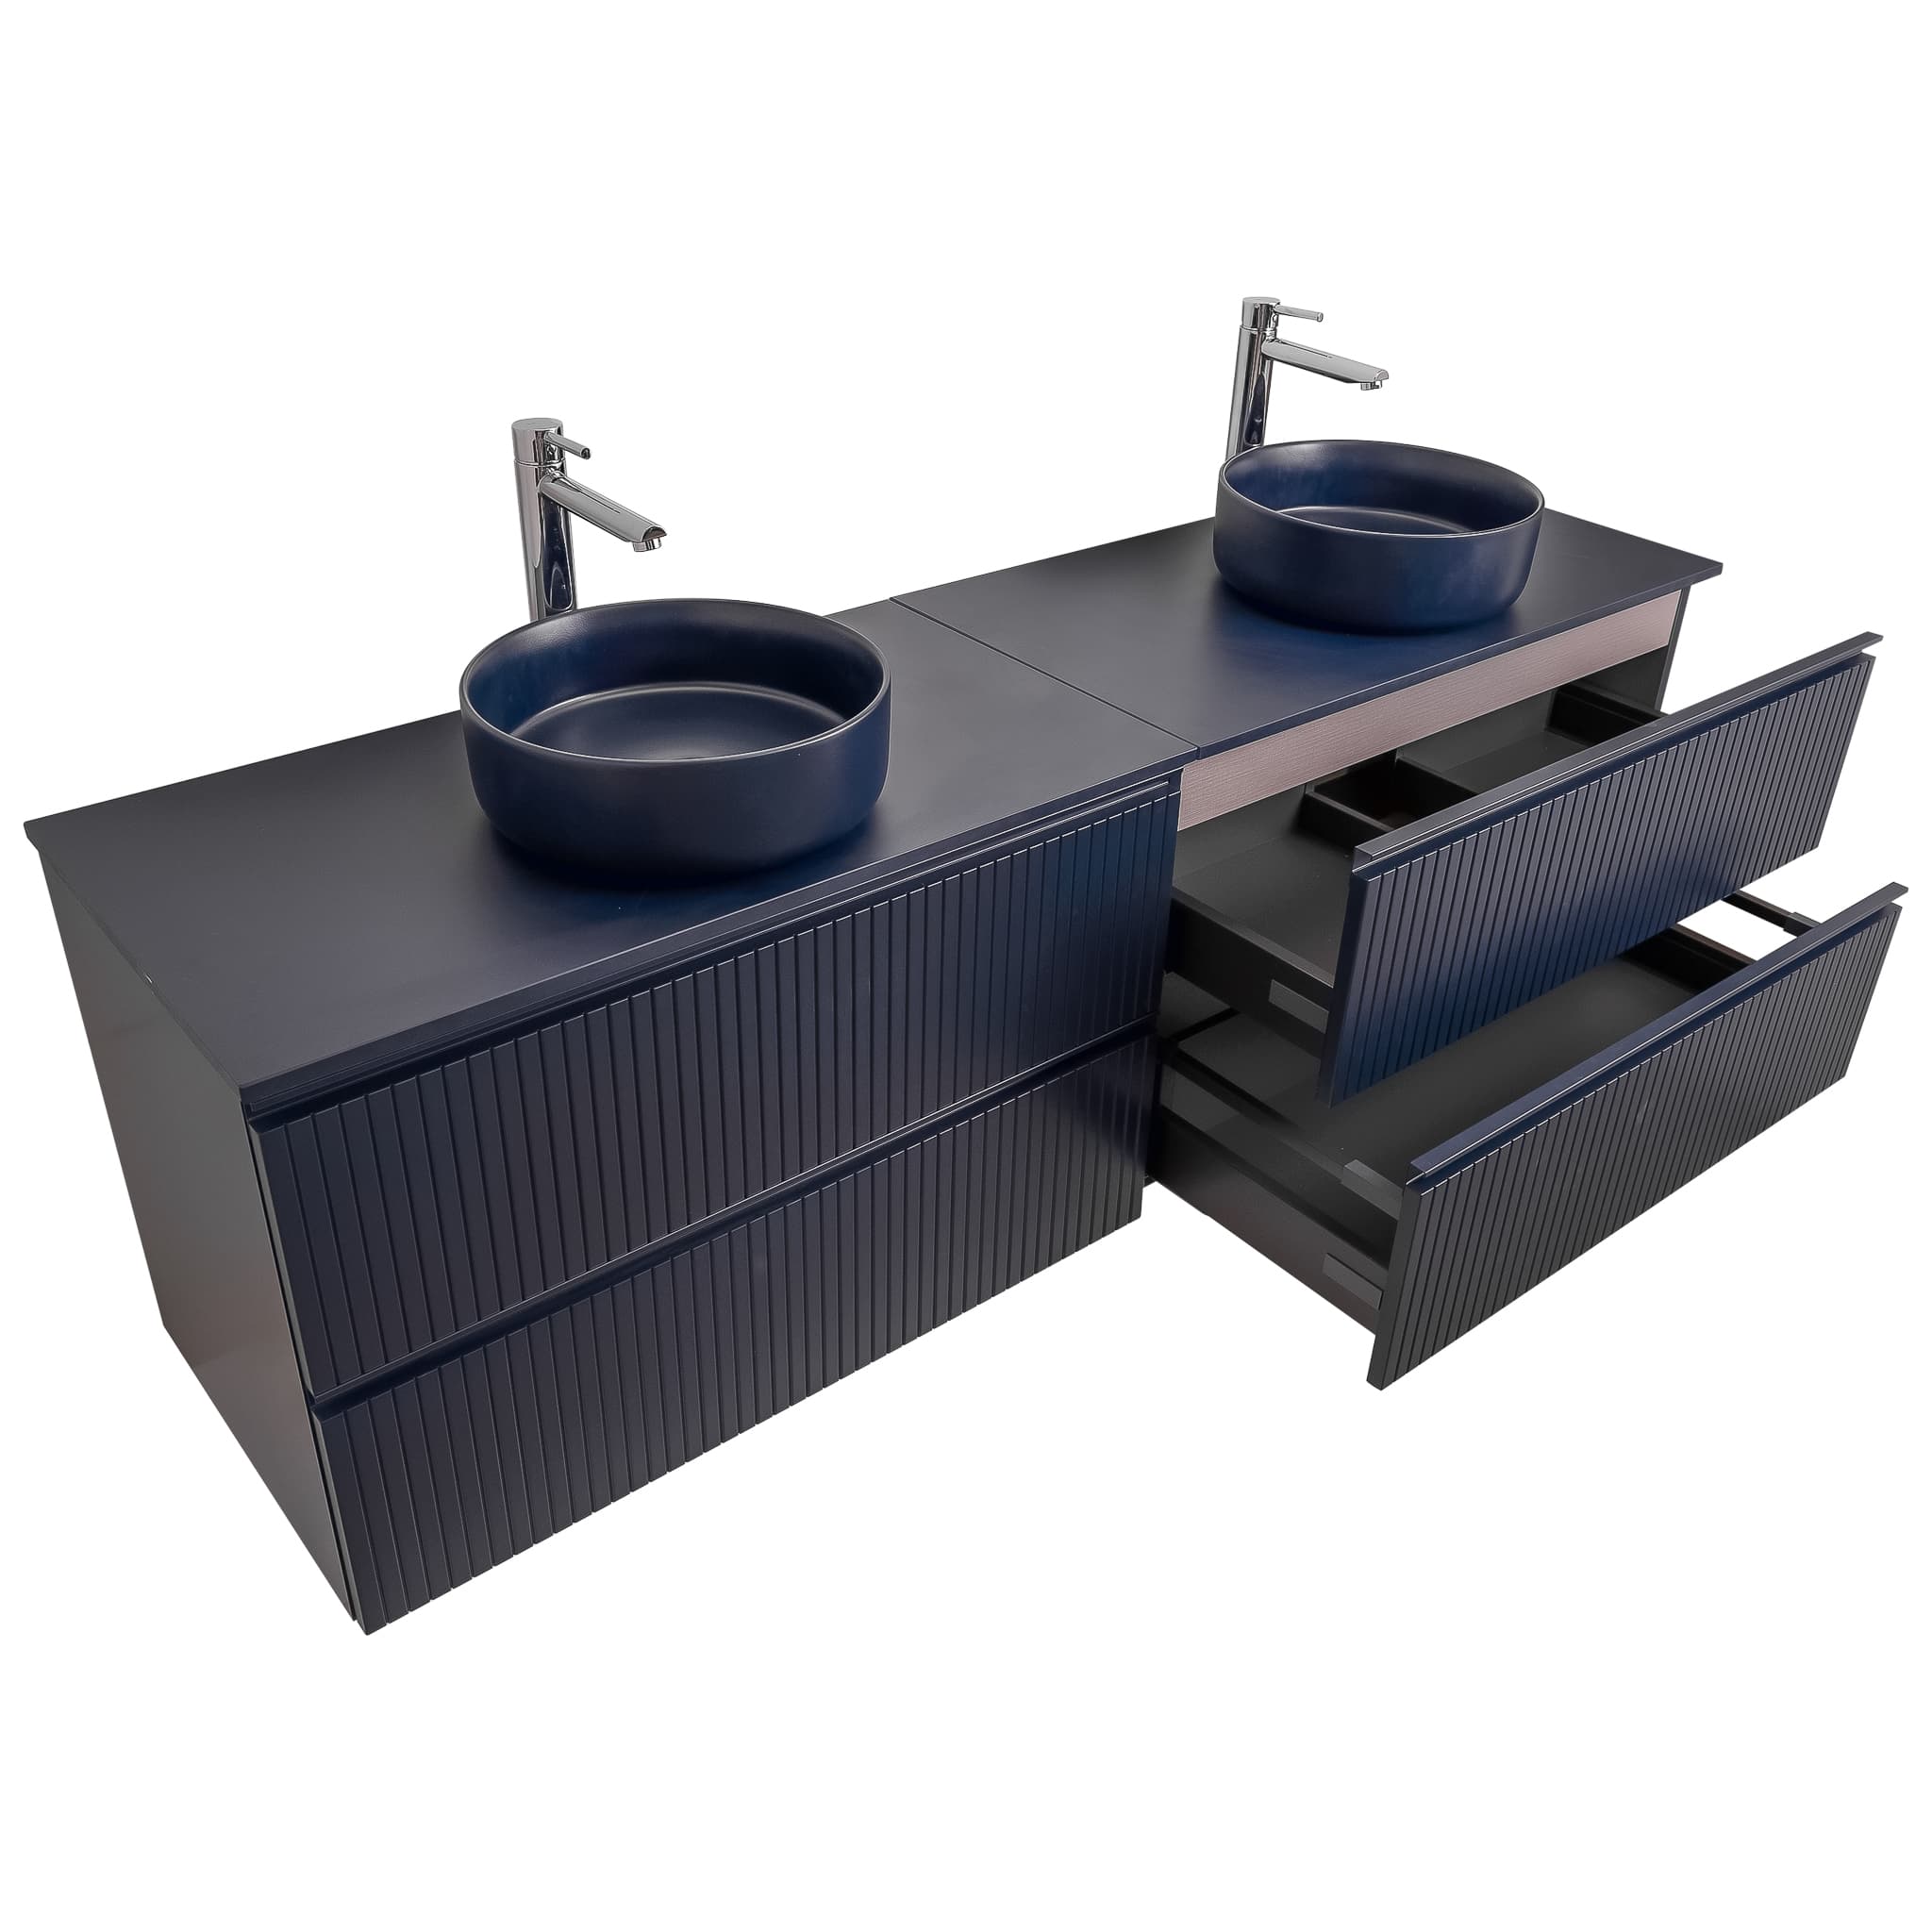 Ares 63 Matte Navy Blue Cabinet, Ares Navy Blue Top And Two Ares Navy Blue Ceramic Basin, Wall Mounted Modern Vanity Set